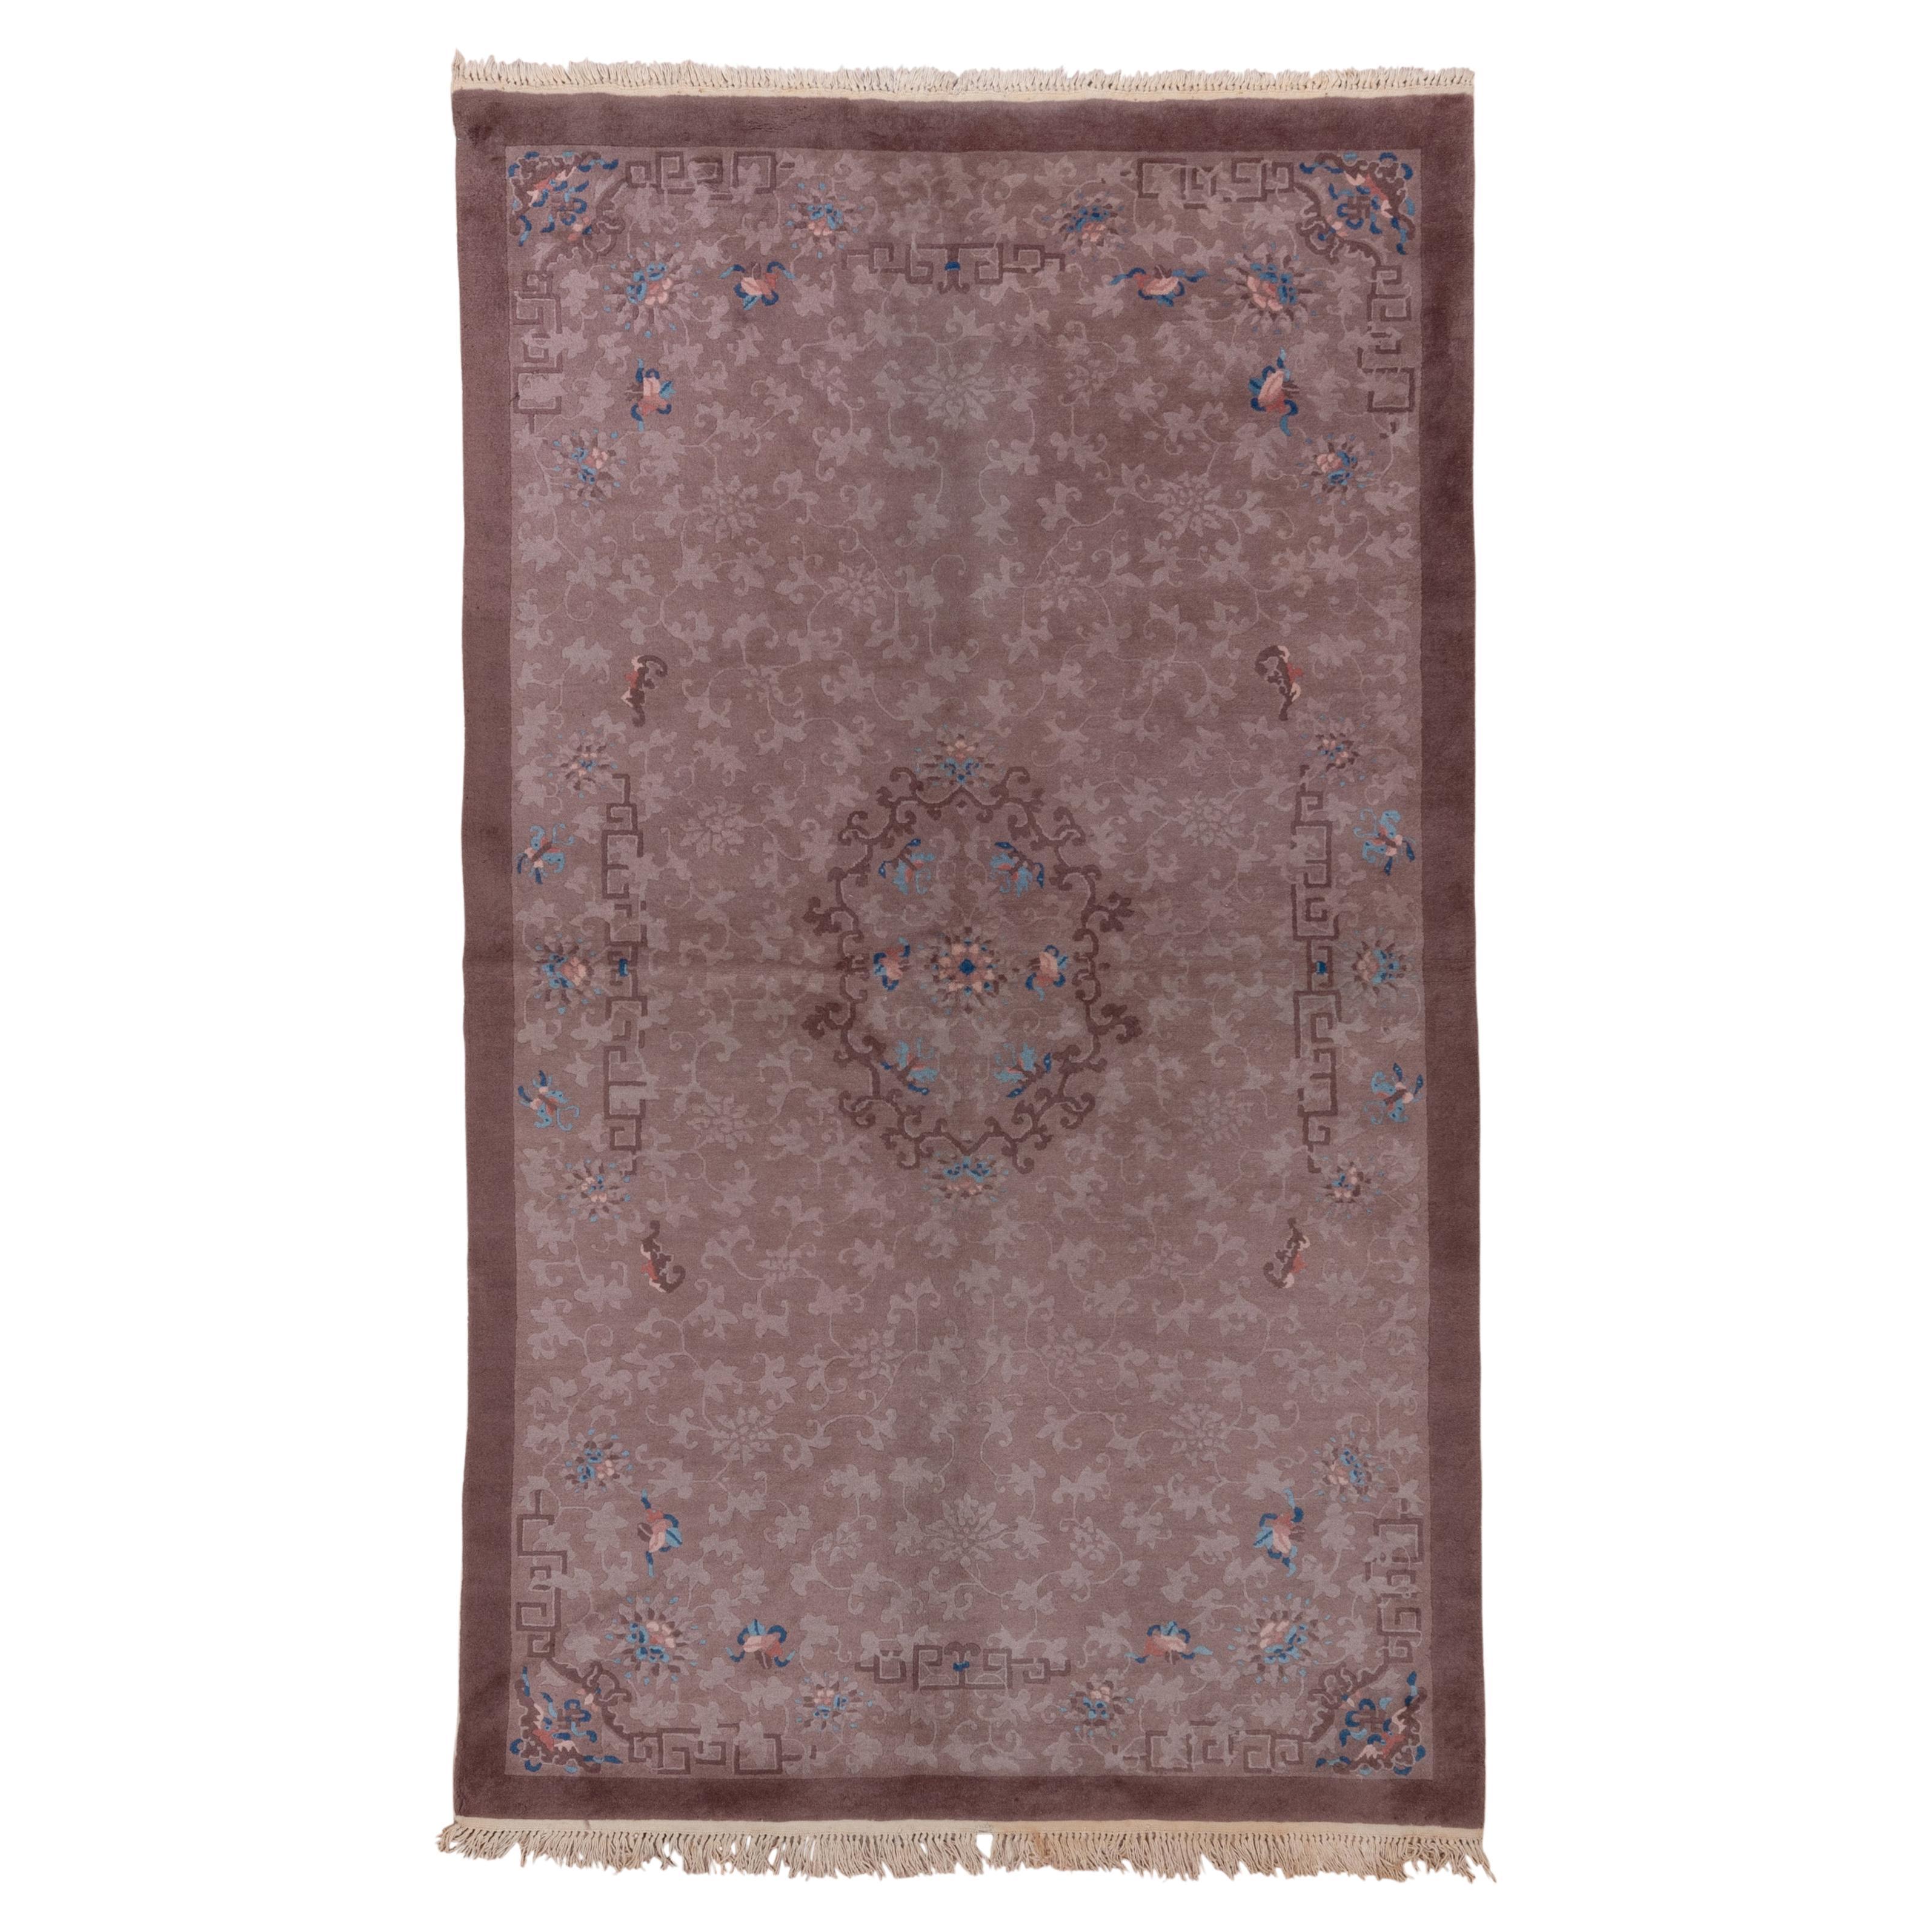 Antique Fette Chinese Rug with Allover Vine Pattern